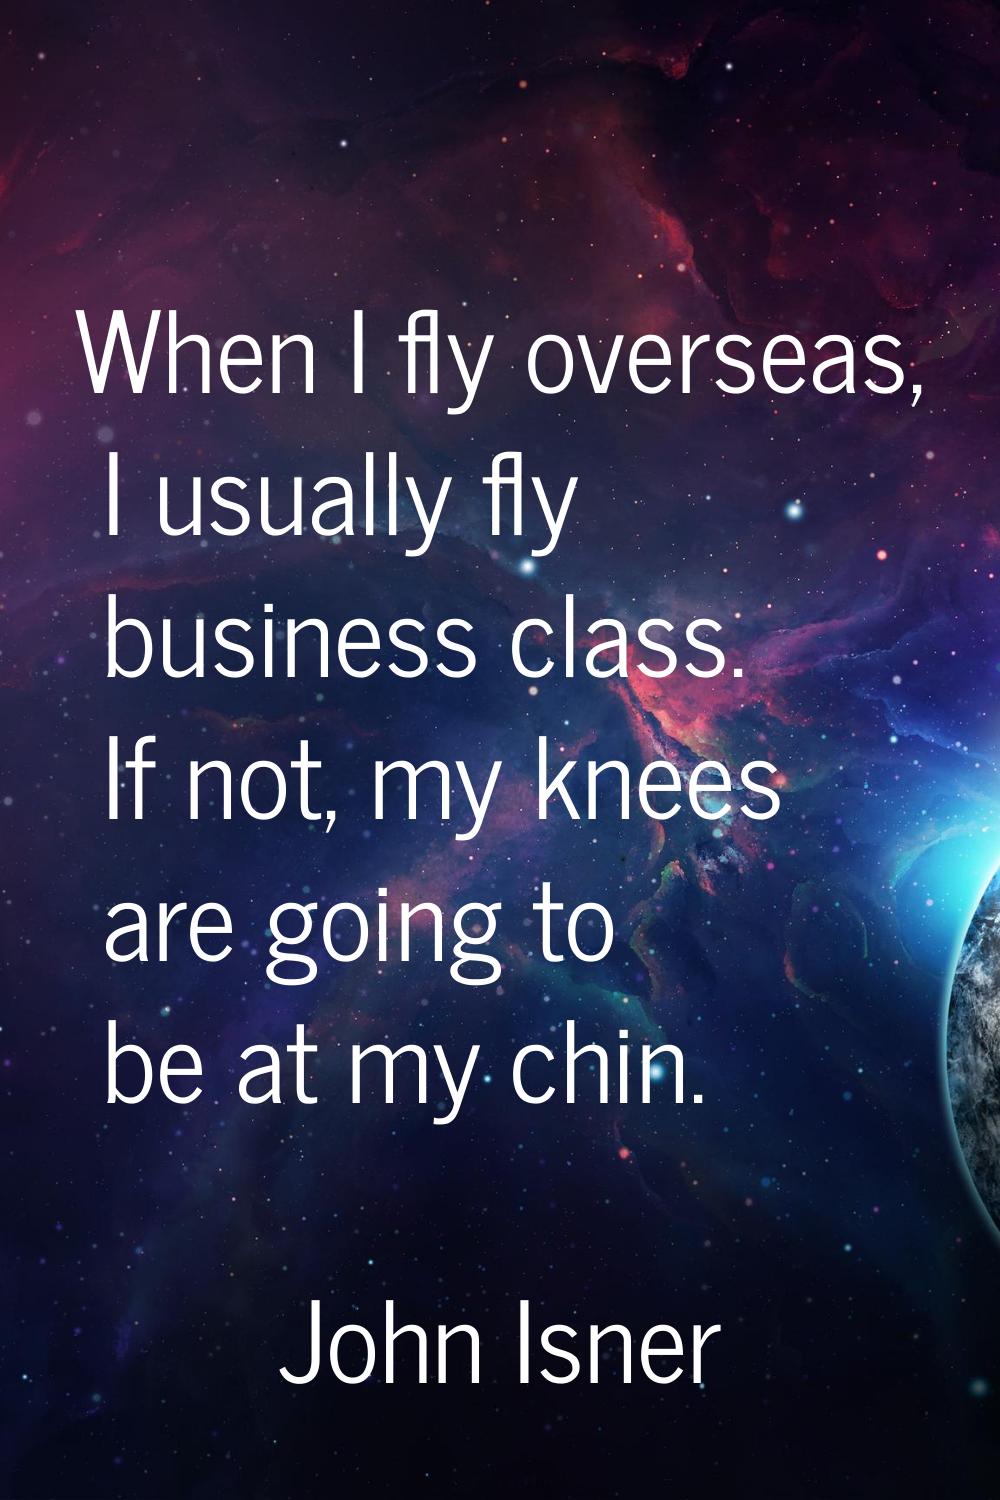 When I fly overseas, I usually fly business class. If not, my knees are going to be at my chin.